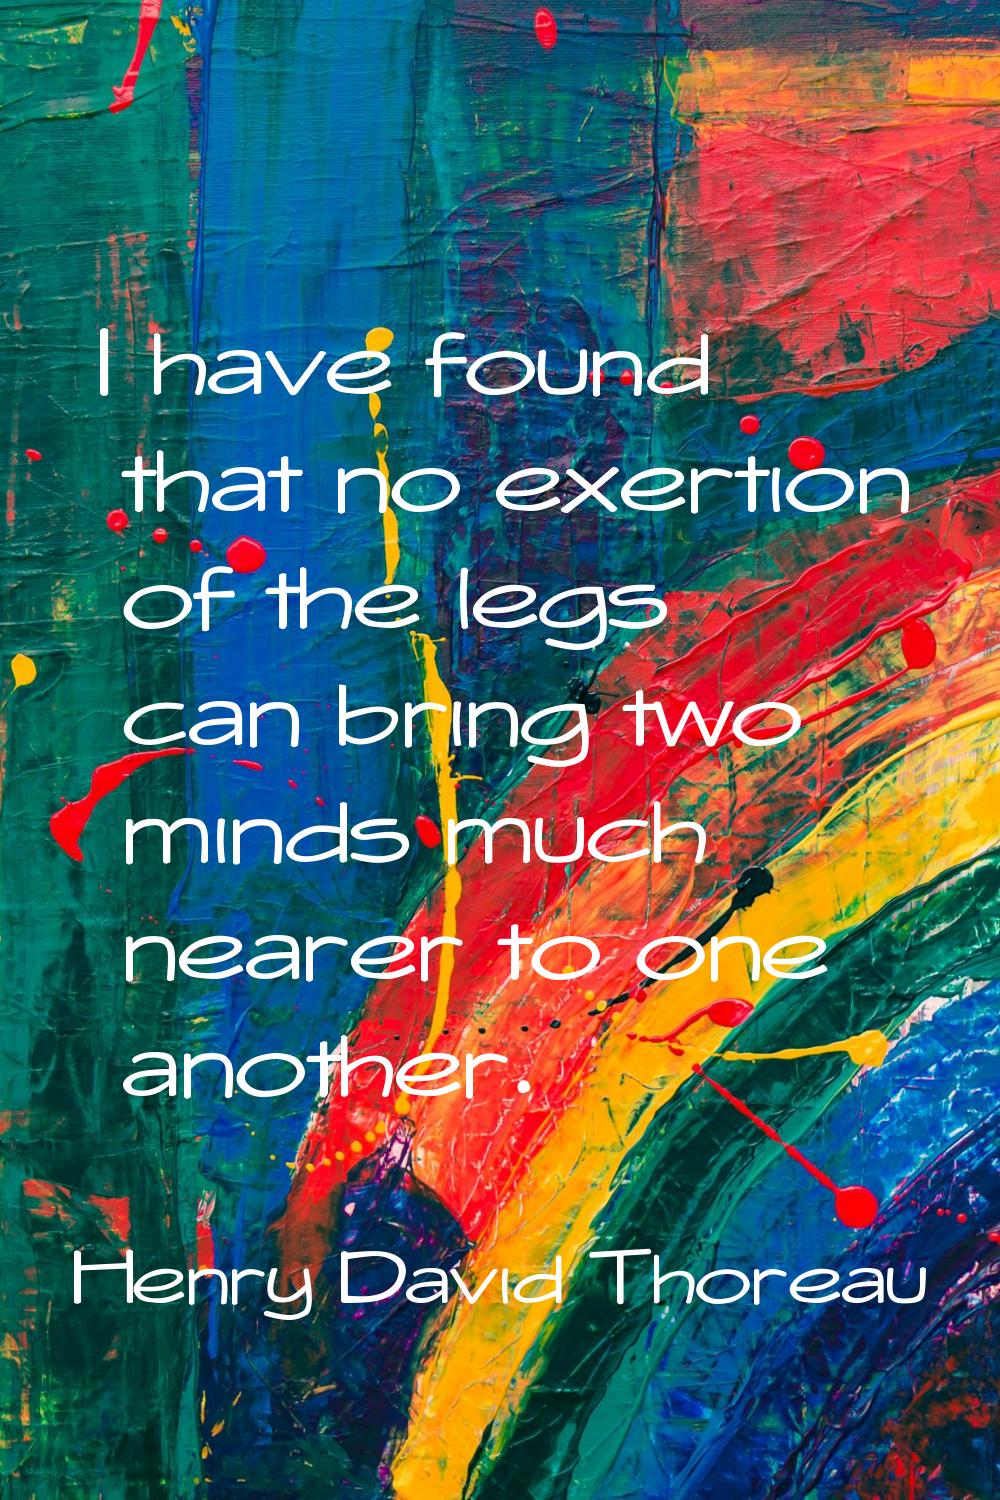 I have found that no exertion of the legs can bring two minds much nearer to one another.